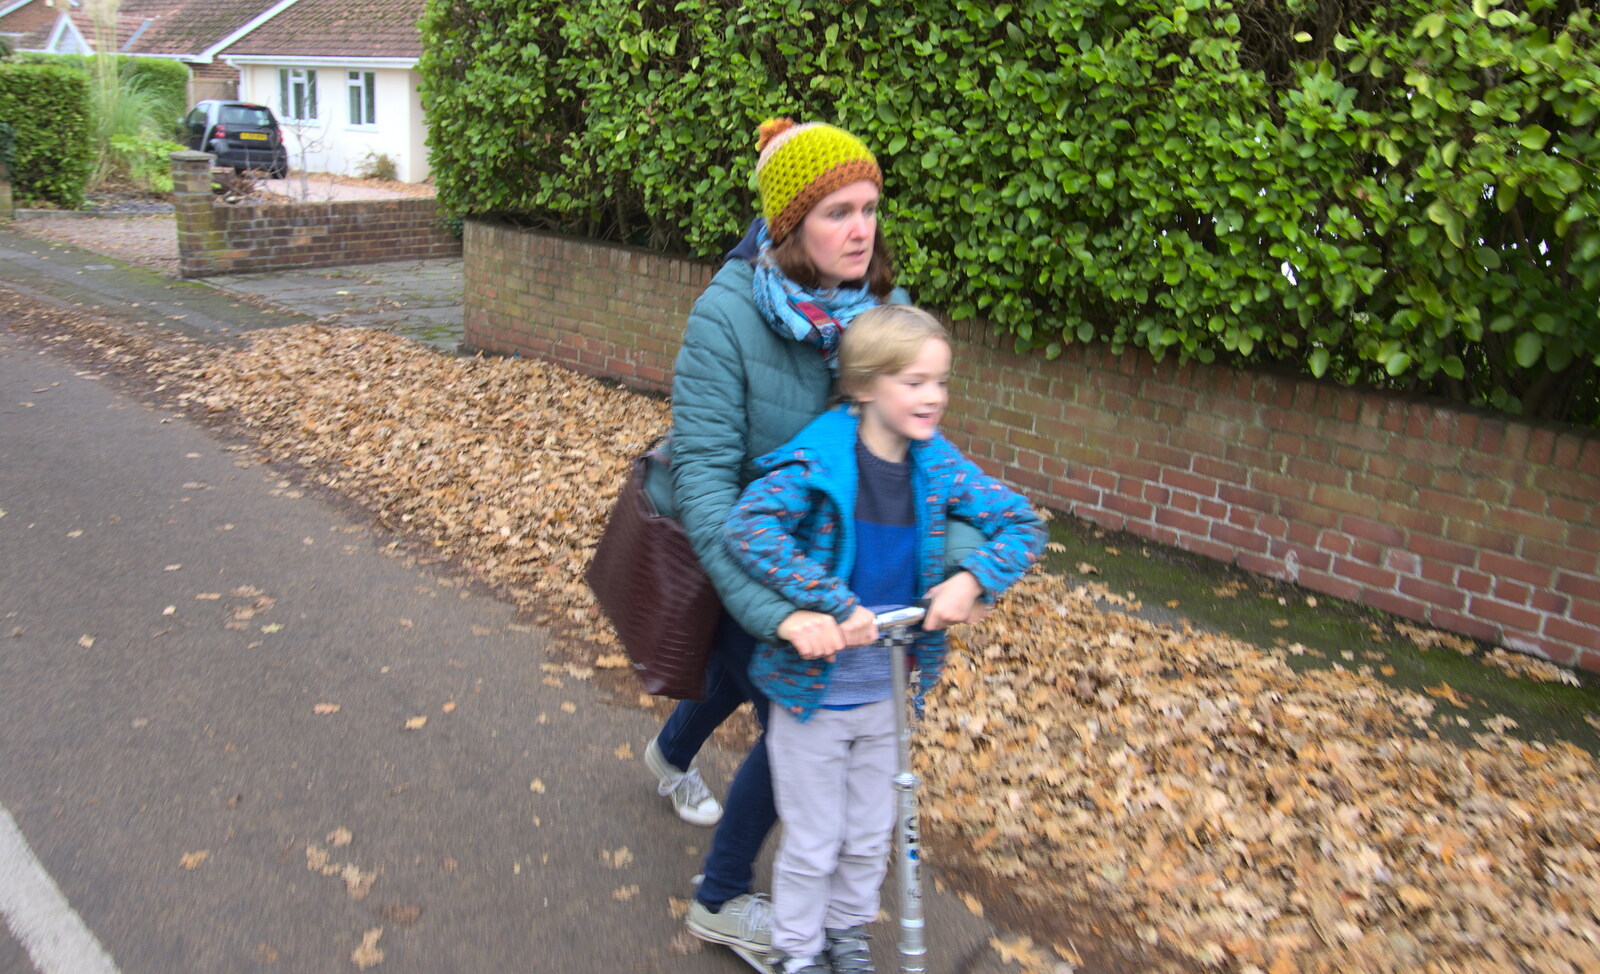 Harry and Isobel share a scooter from Thanksgiving in Highcliffe, Dorset - 23rd November 2018